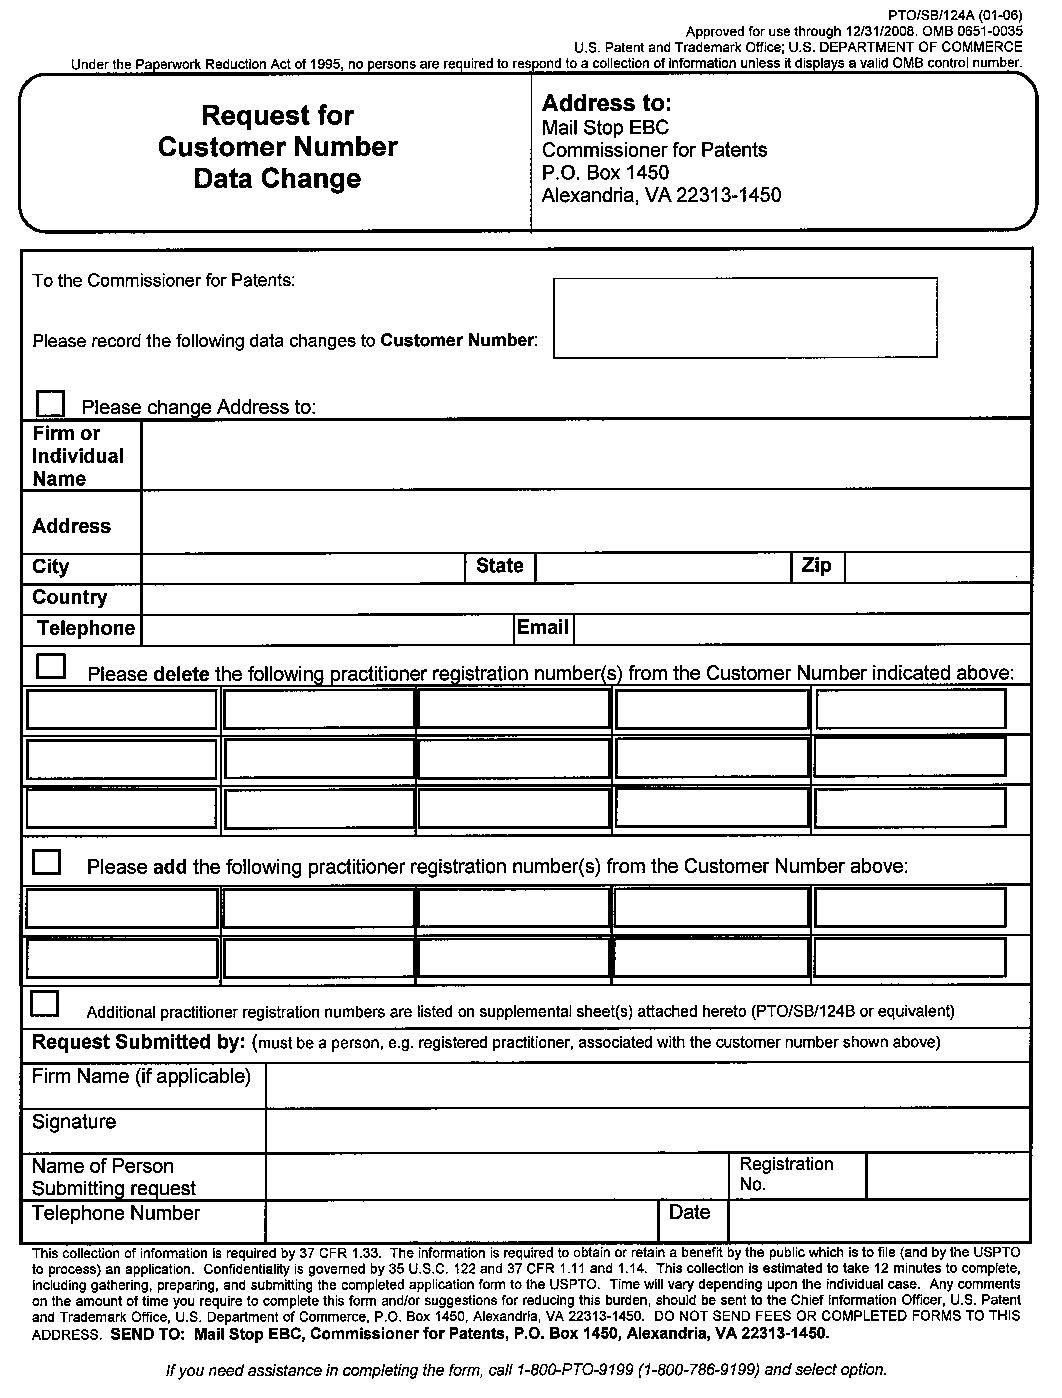 form pto/sb/124a. request for customer number